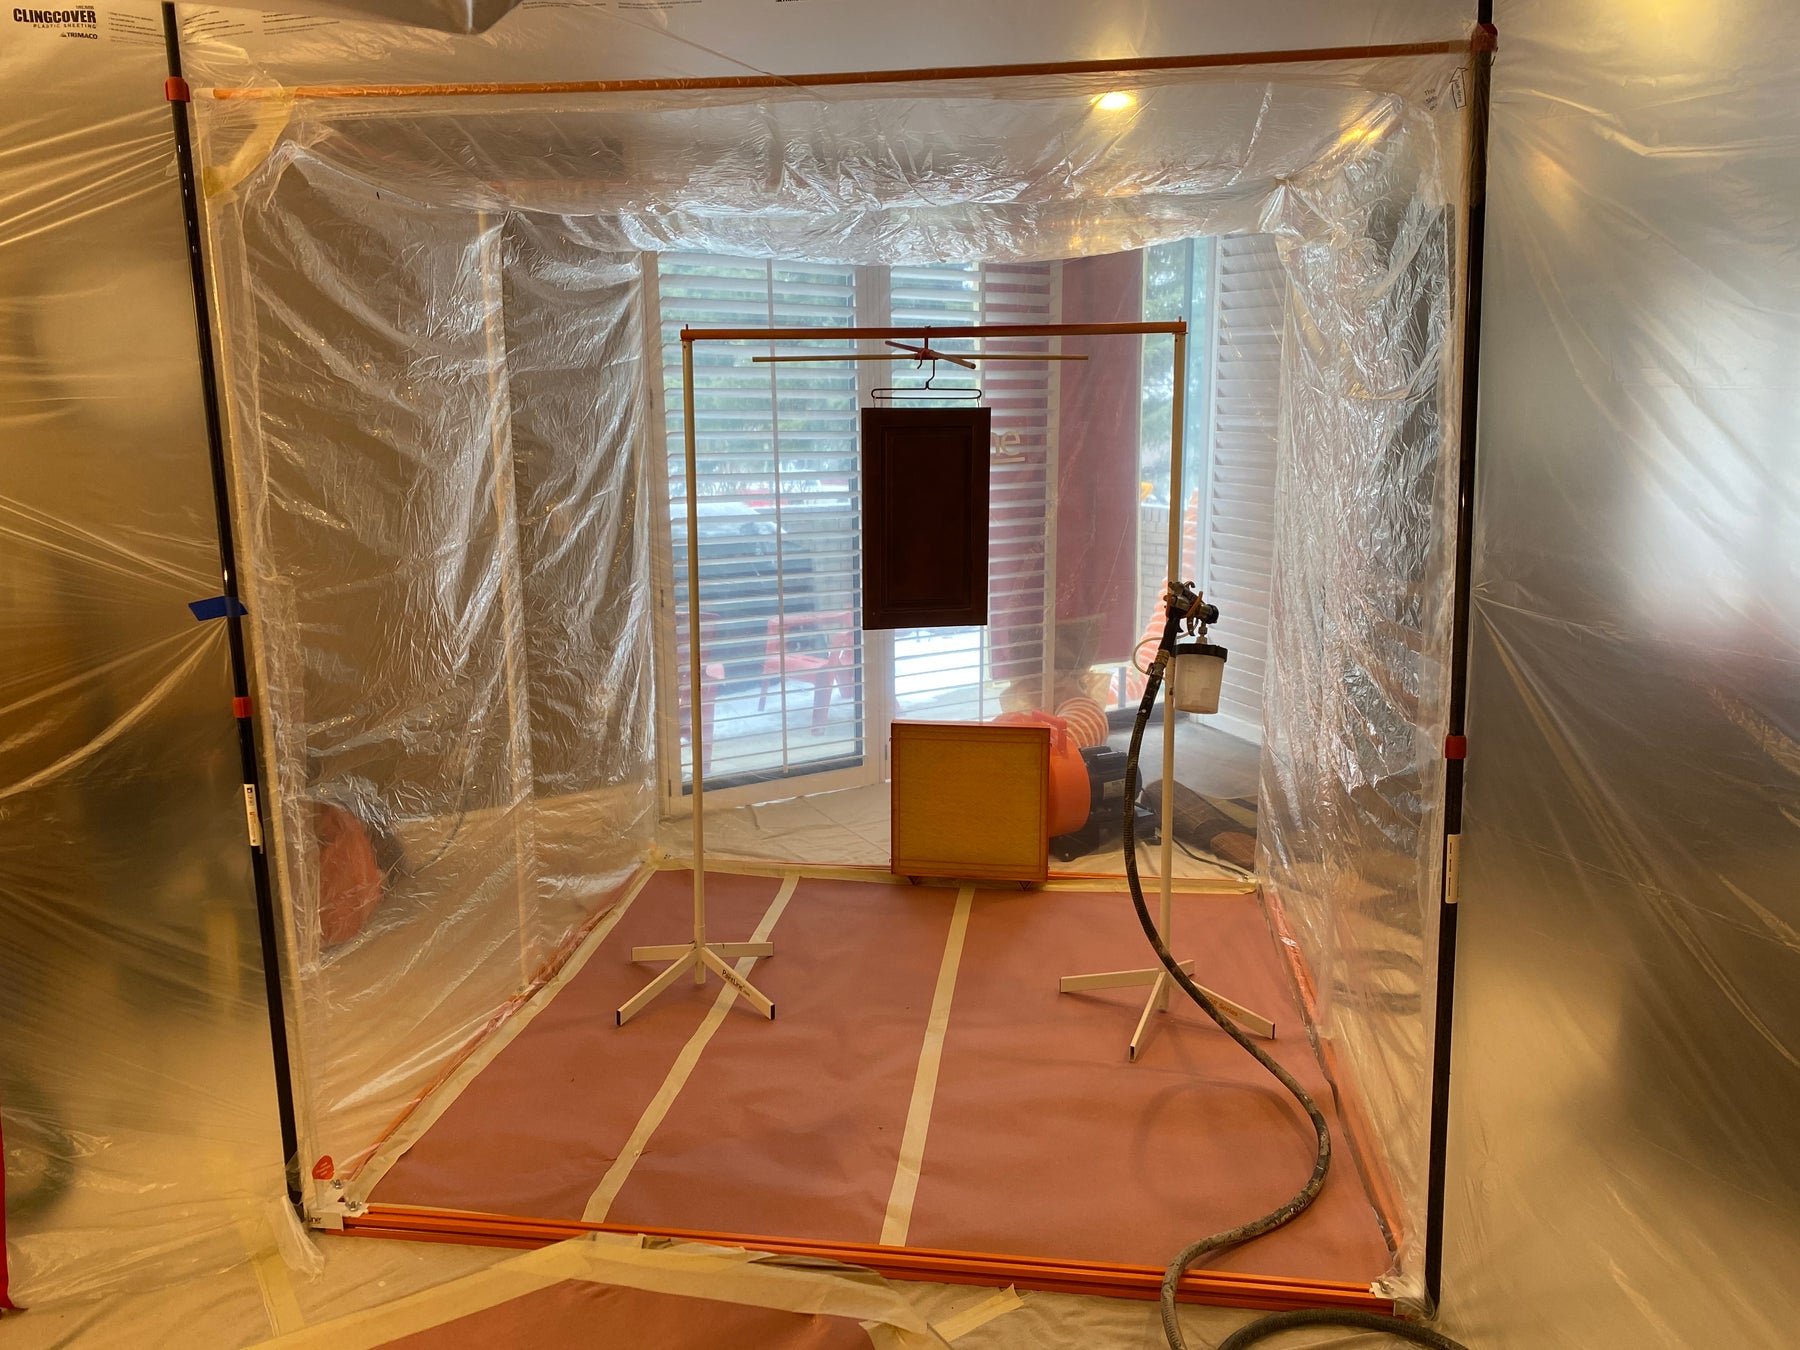 Spray Booth (9x6x5.5 ft) - Portable Paint Booth Tent, Spray Paint Booth